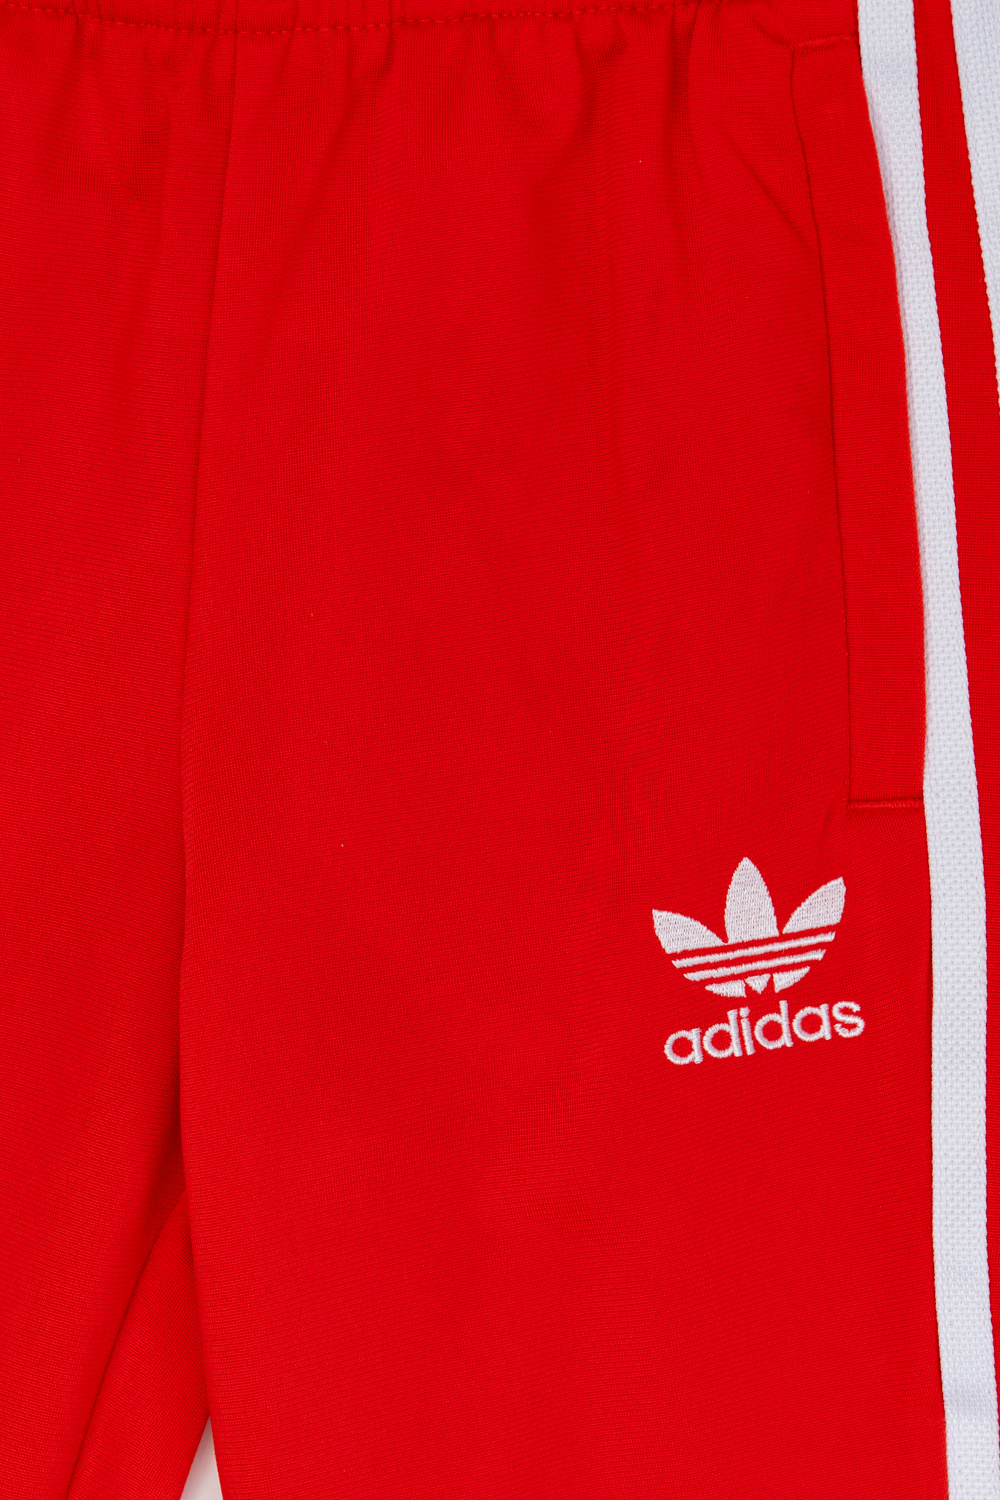 adidas More Kids Trousers with logo